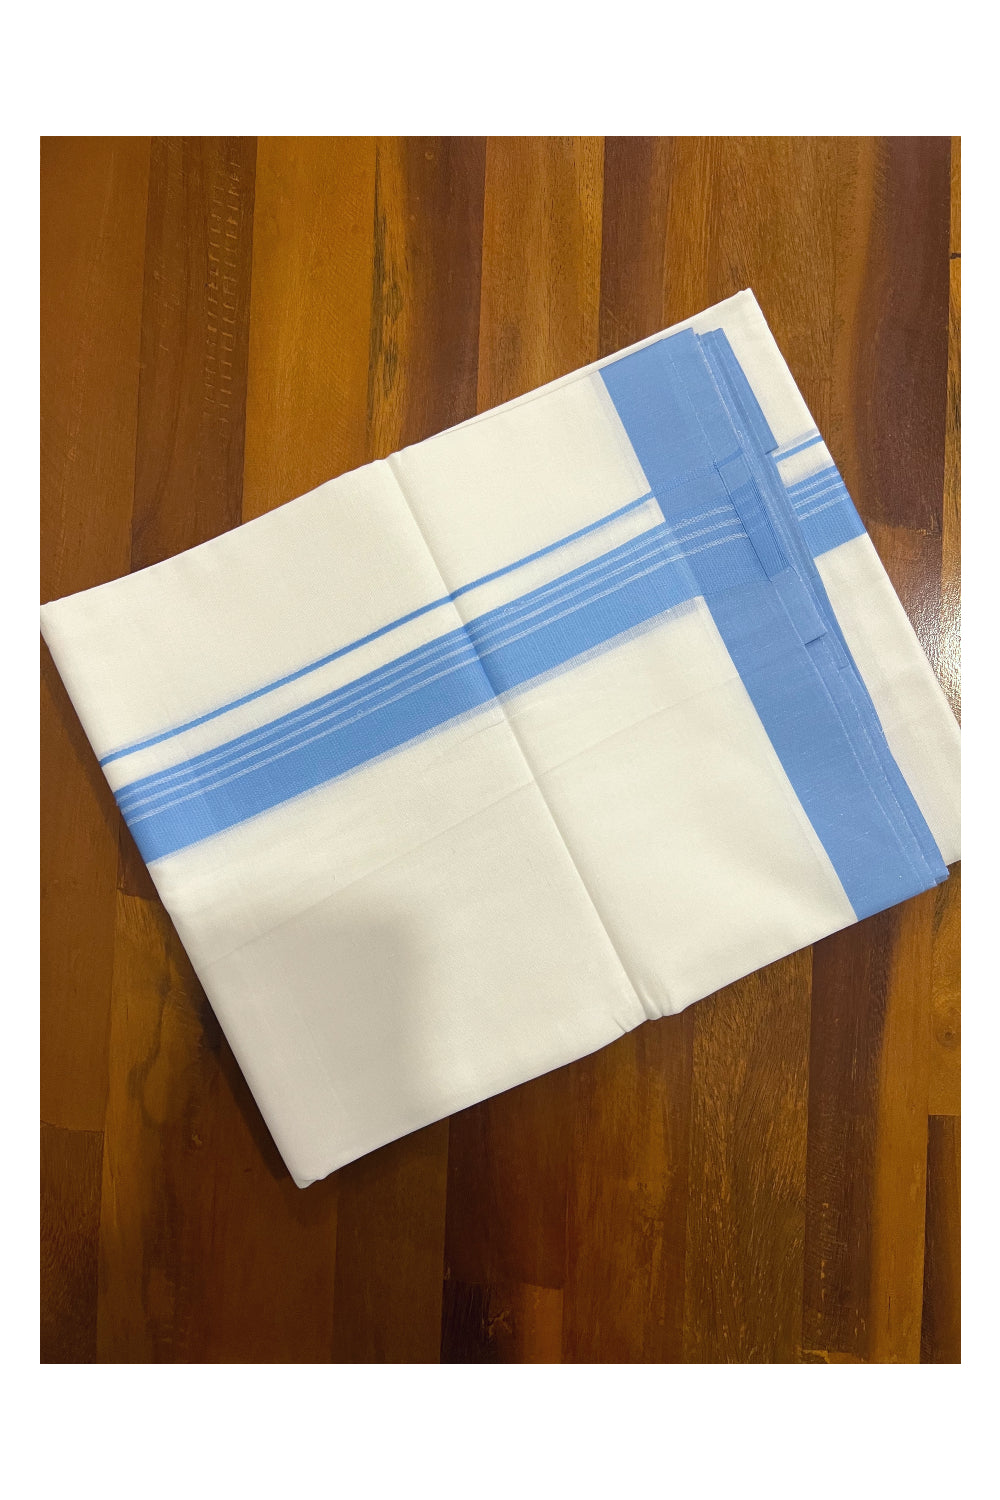 Pure White Cotton Double Mundu with Light Blue Border (South Indian Dhoti)